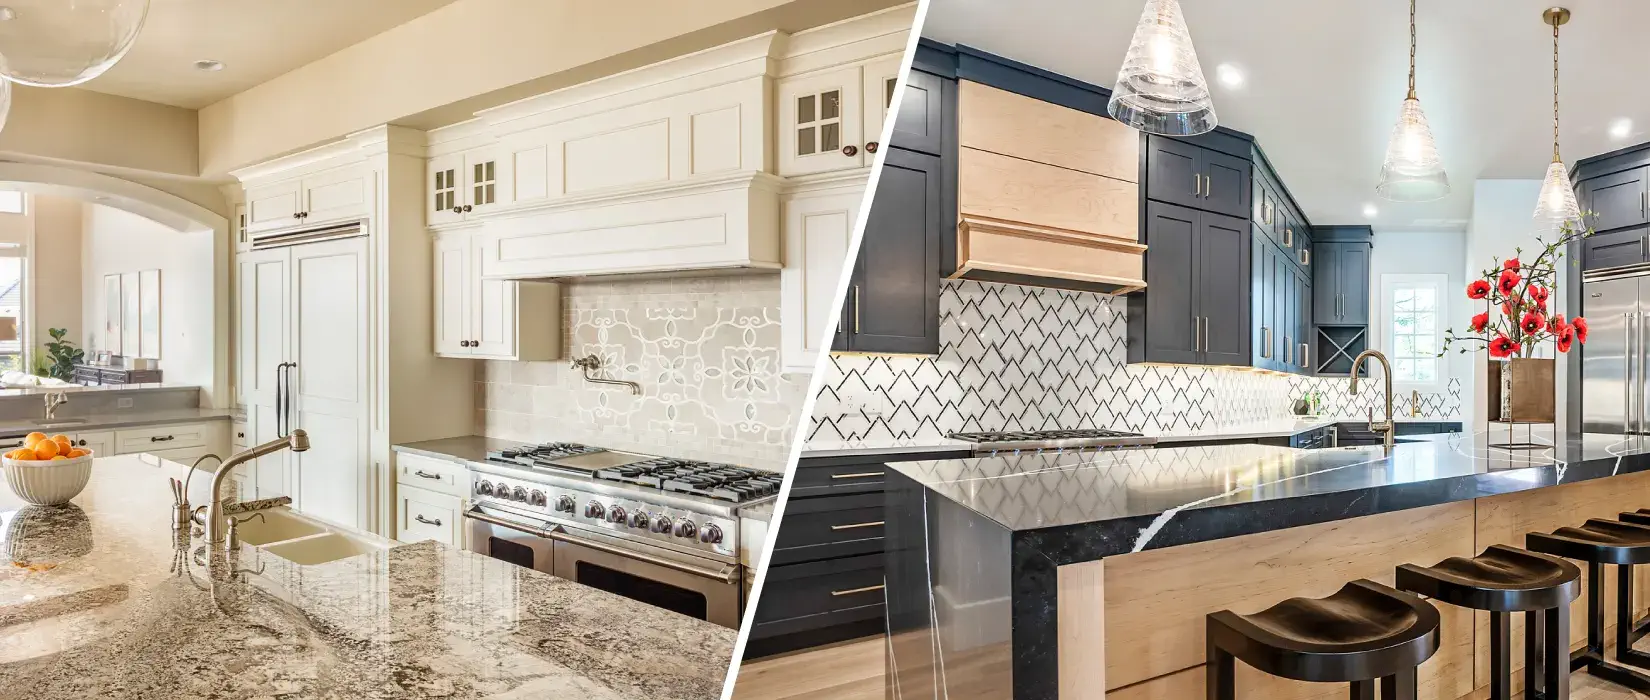 Side by side of a kitchen with custom cabinets and a kitchen with semi-custom cabinets.